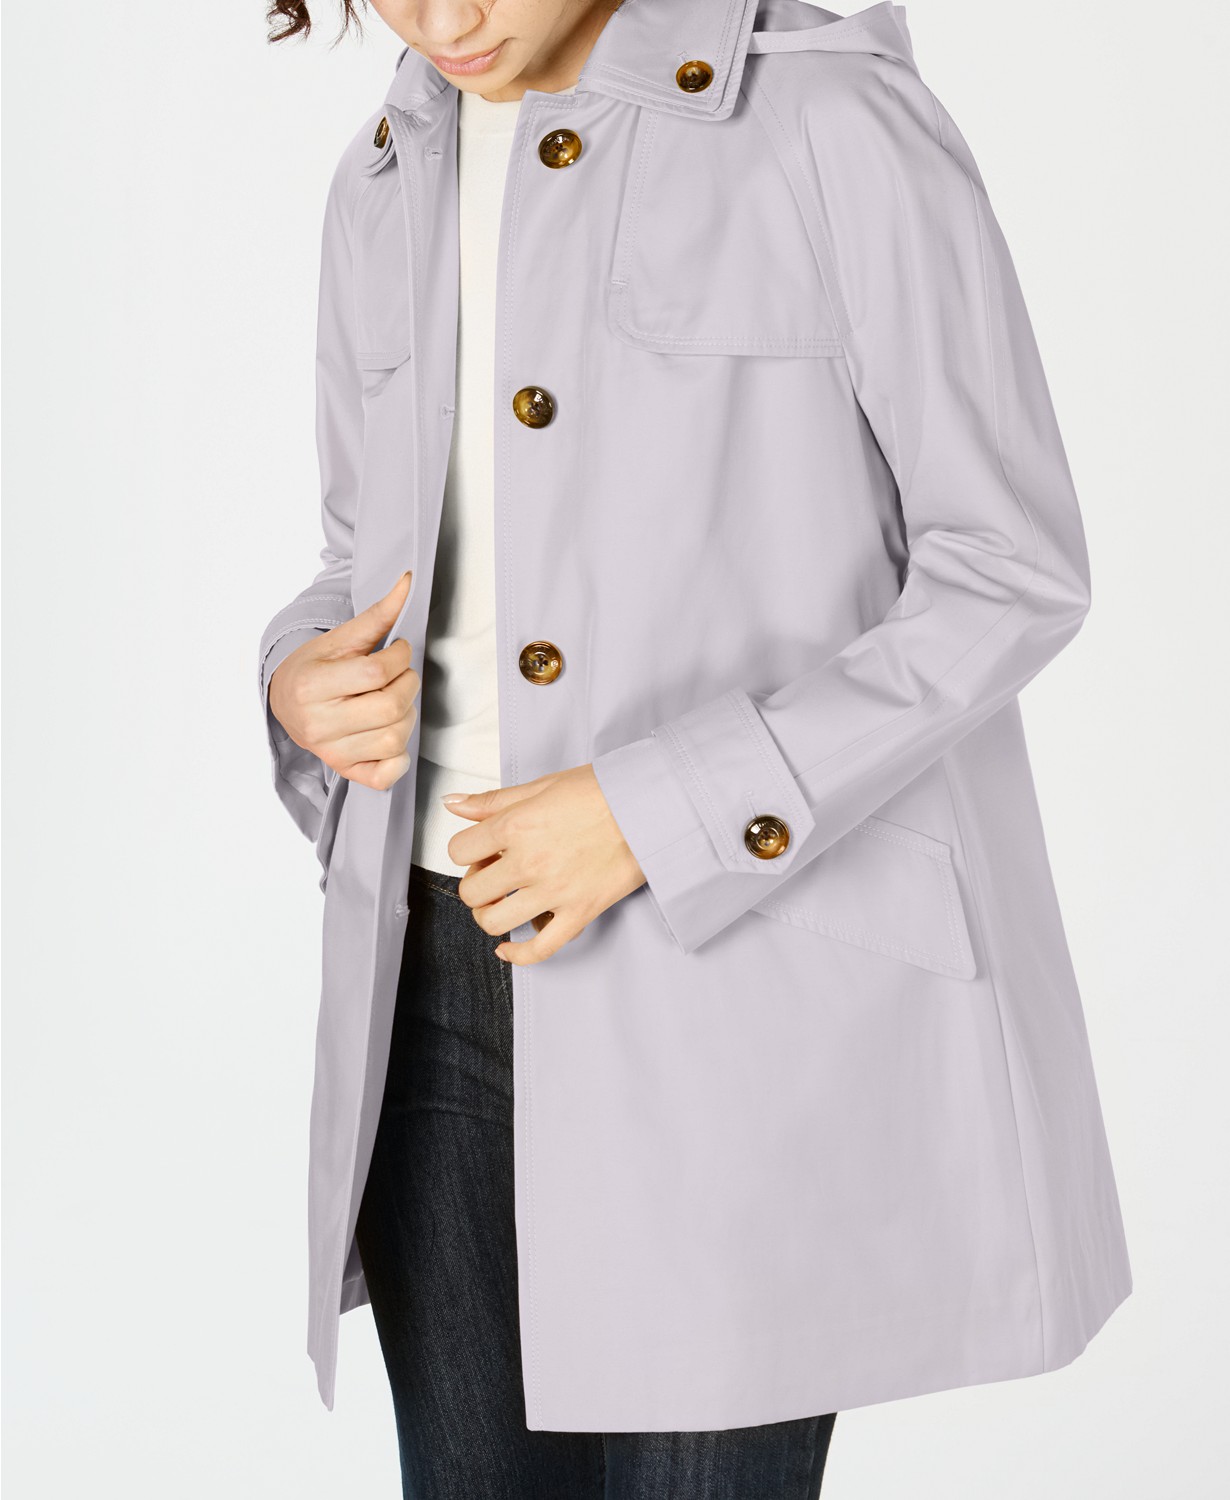 www.couturepoint.com-london-fog-womens-beige-hooded-water-resistant-raincoat-copy